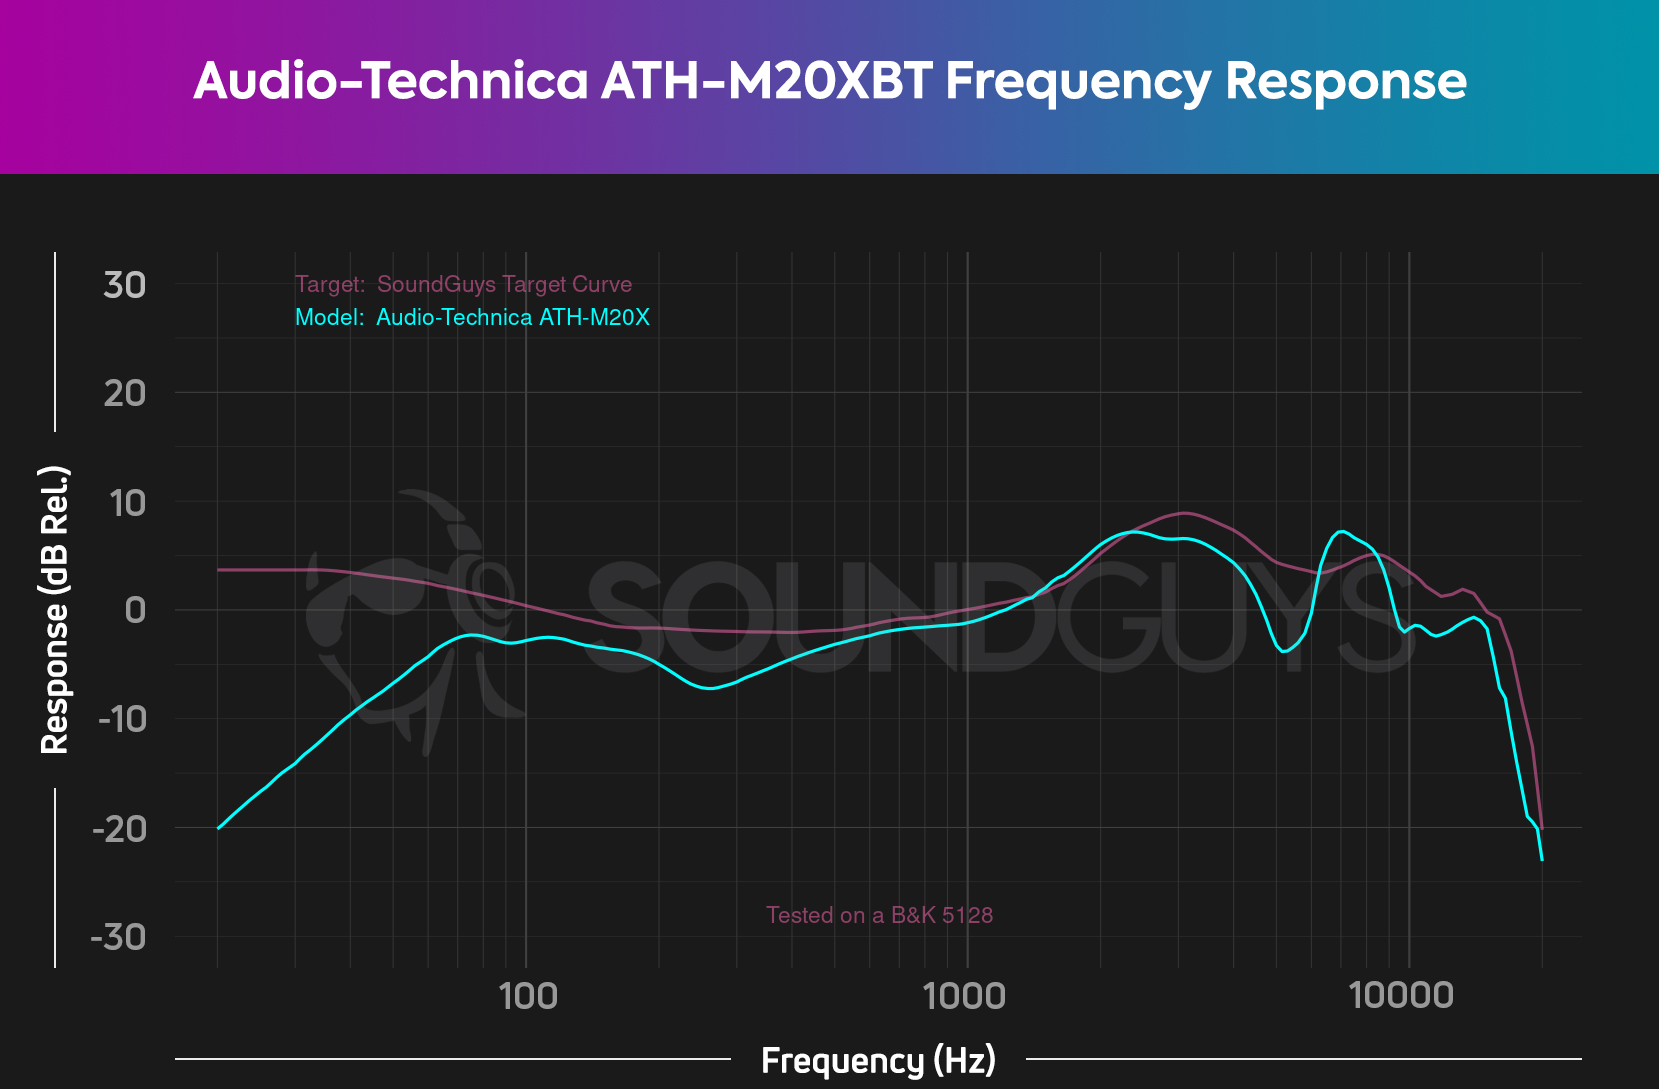 A chart showing the frequency response of the Audio-Technica ATH-M20XBT